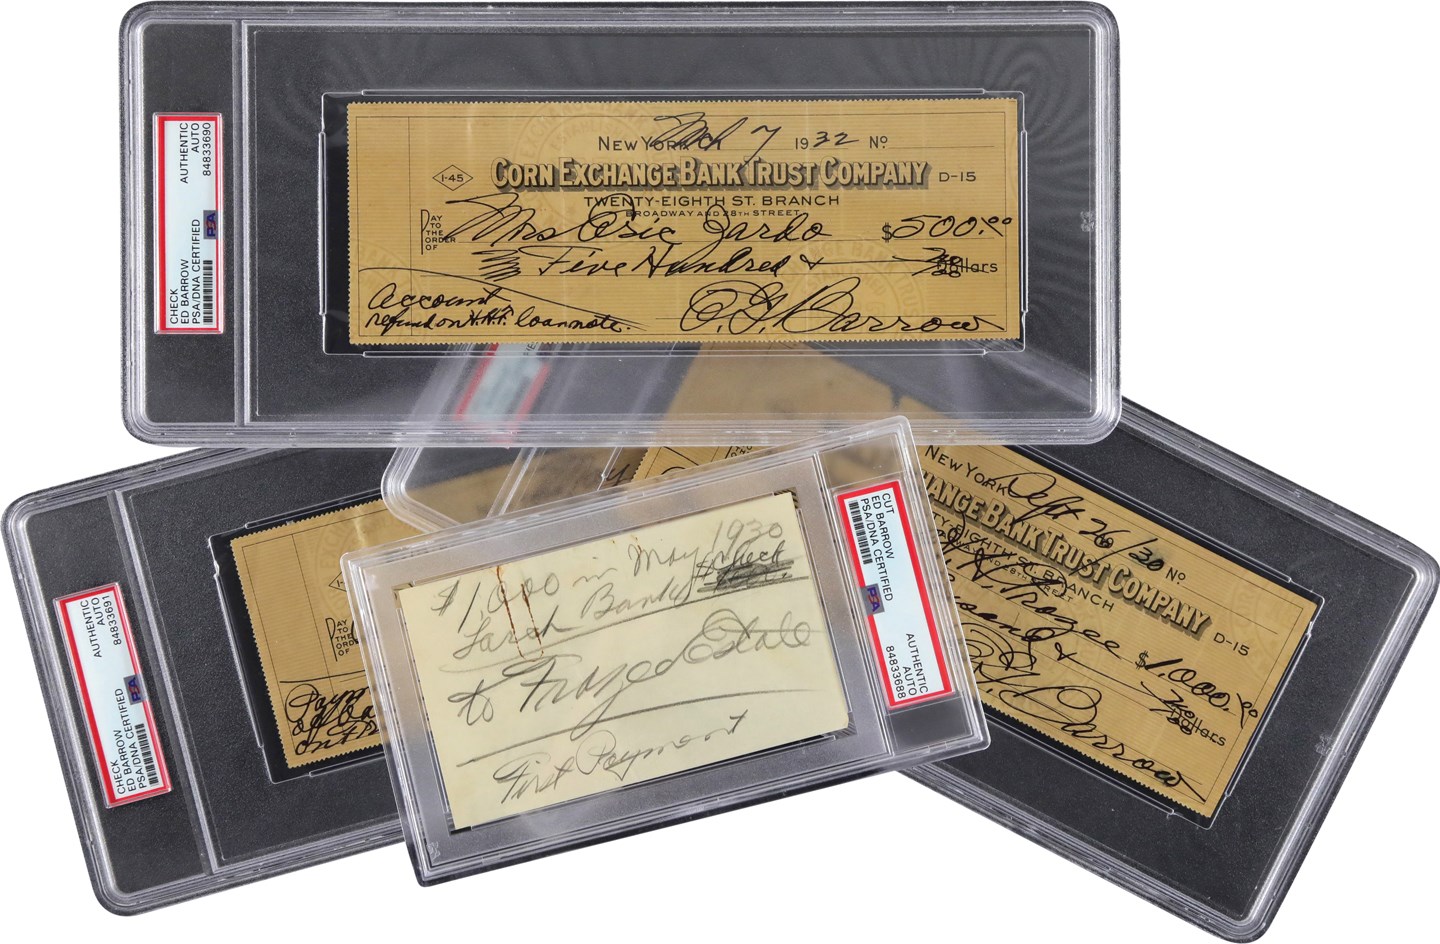 - 1930s Ed Barrow Signed Checks and Note to Harry Frazee Estate (ex-Barry Halper Collection)